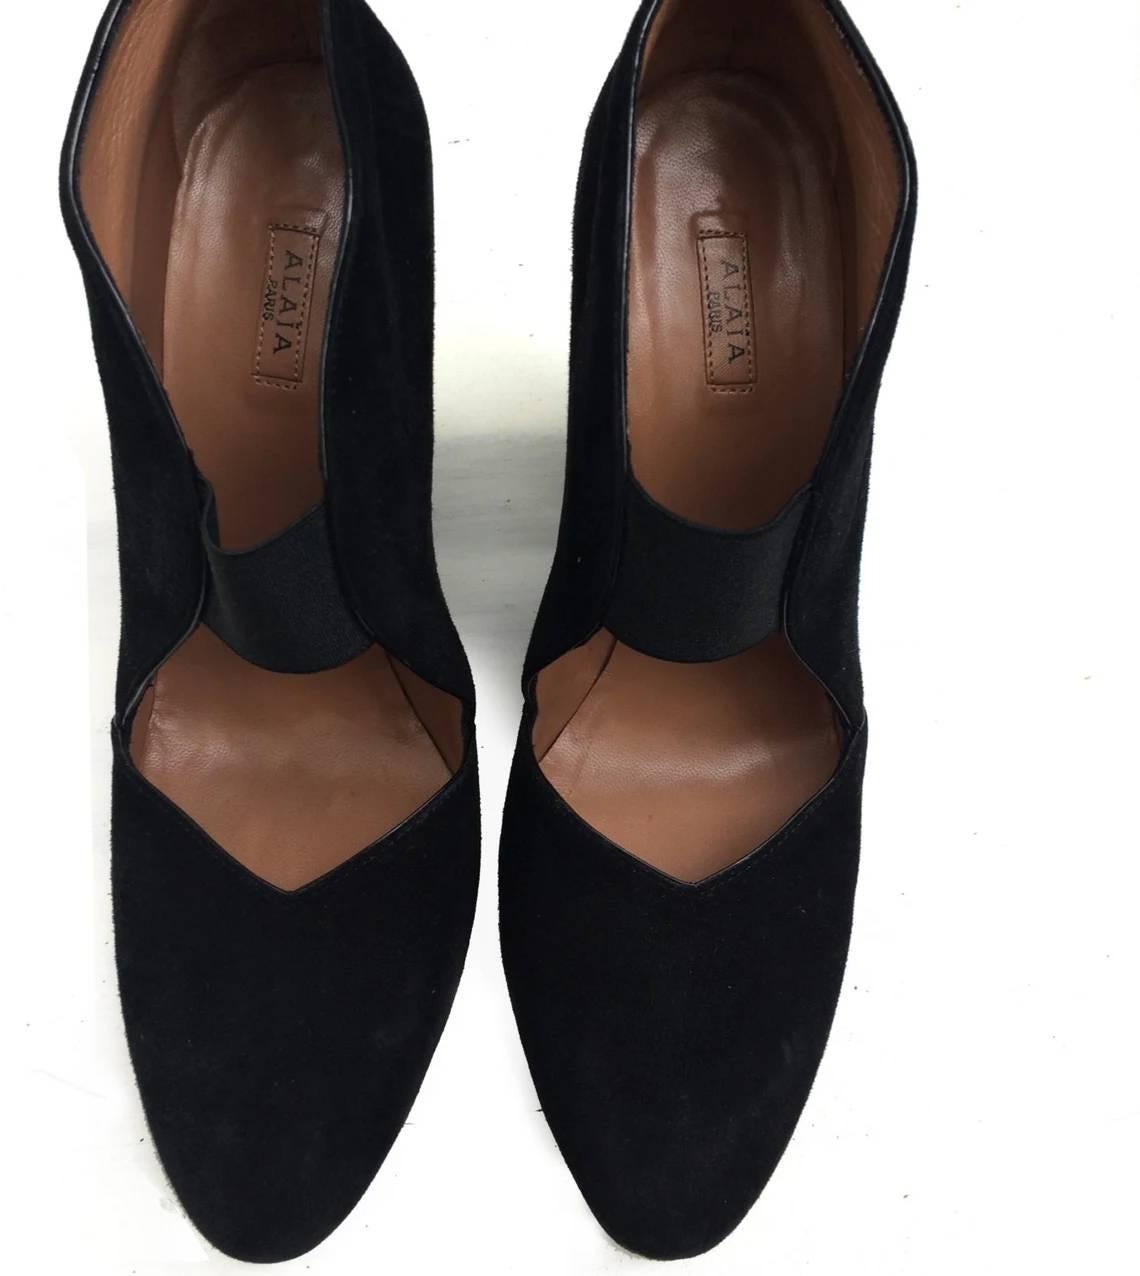  ALAIA black suede pumps shoes
vintage, in very good condition
heels height: 11 cm
size: 38 Italian - 4 UK - 8 US